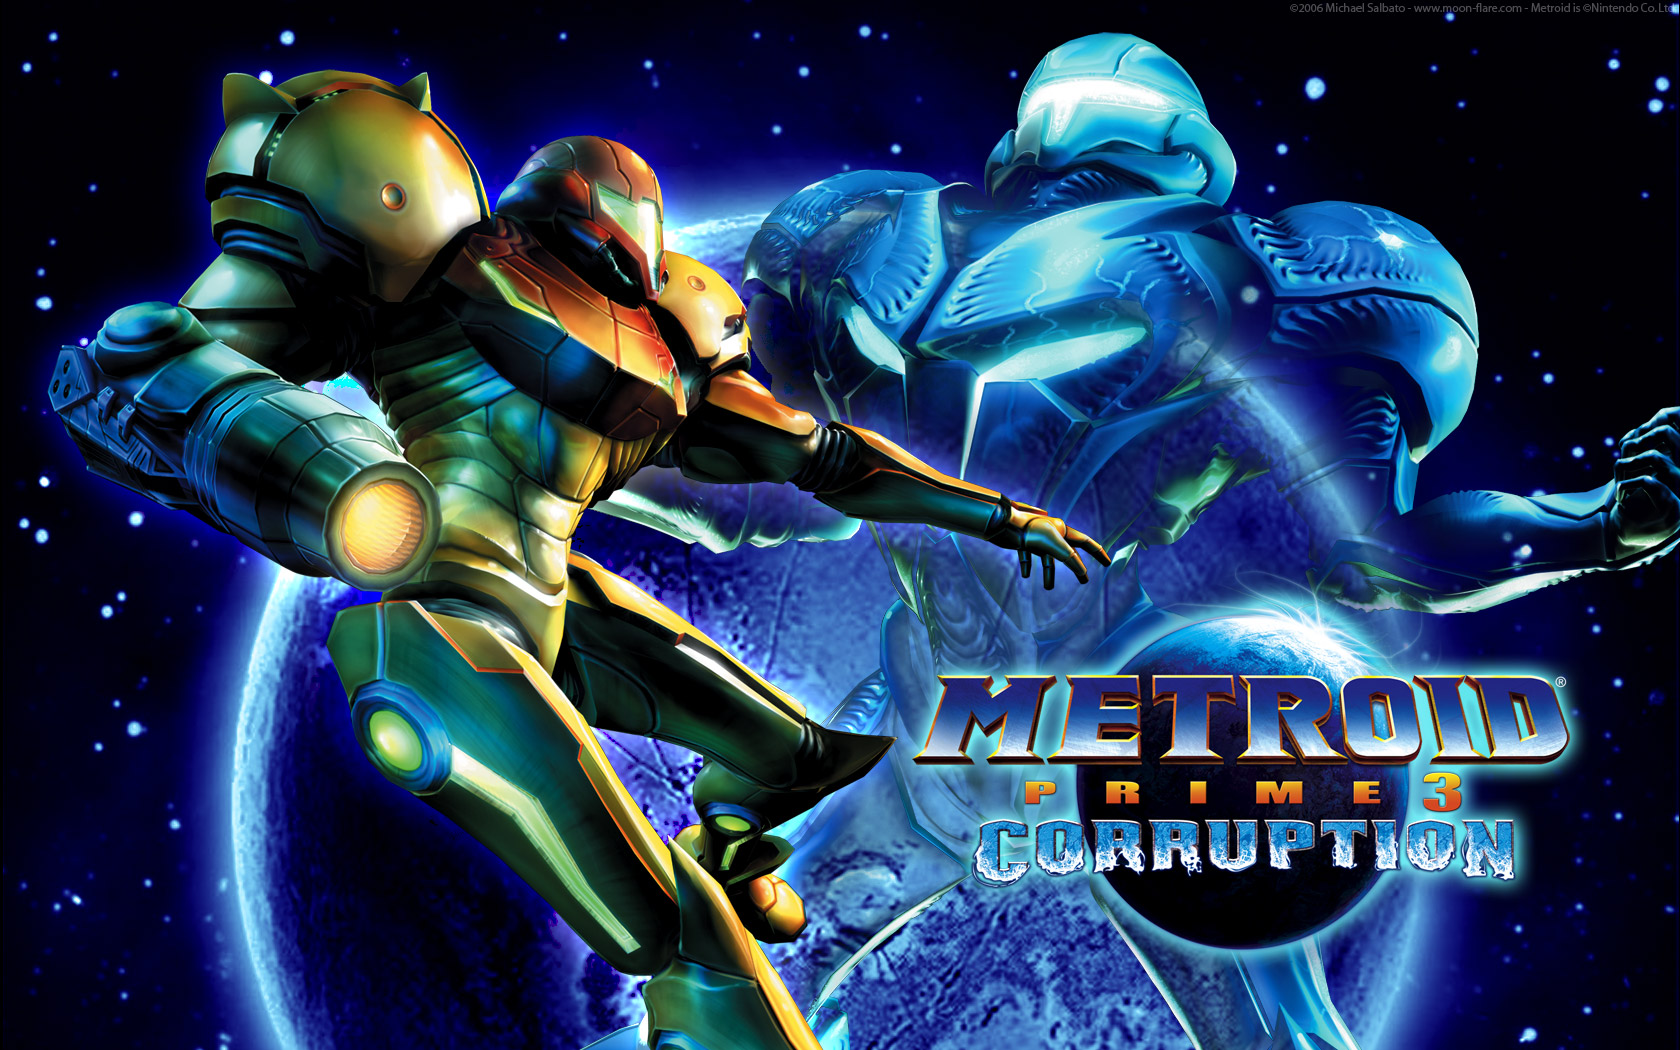 Metroid Prime 3: Corruption Wallpaper and Background Image | 1680x1050